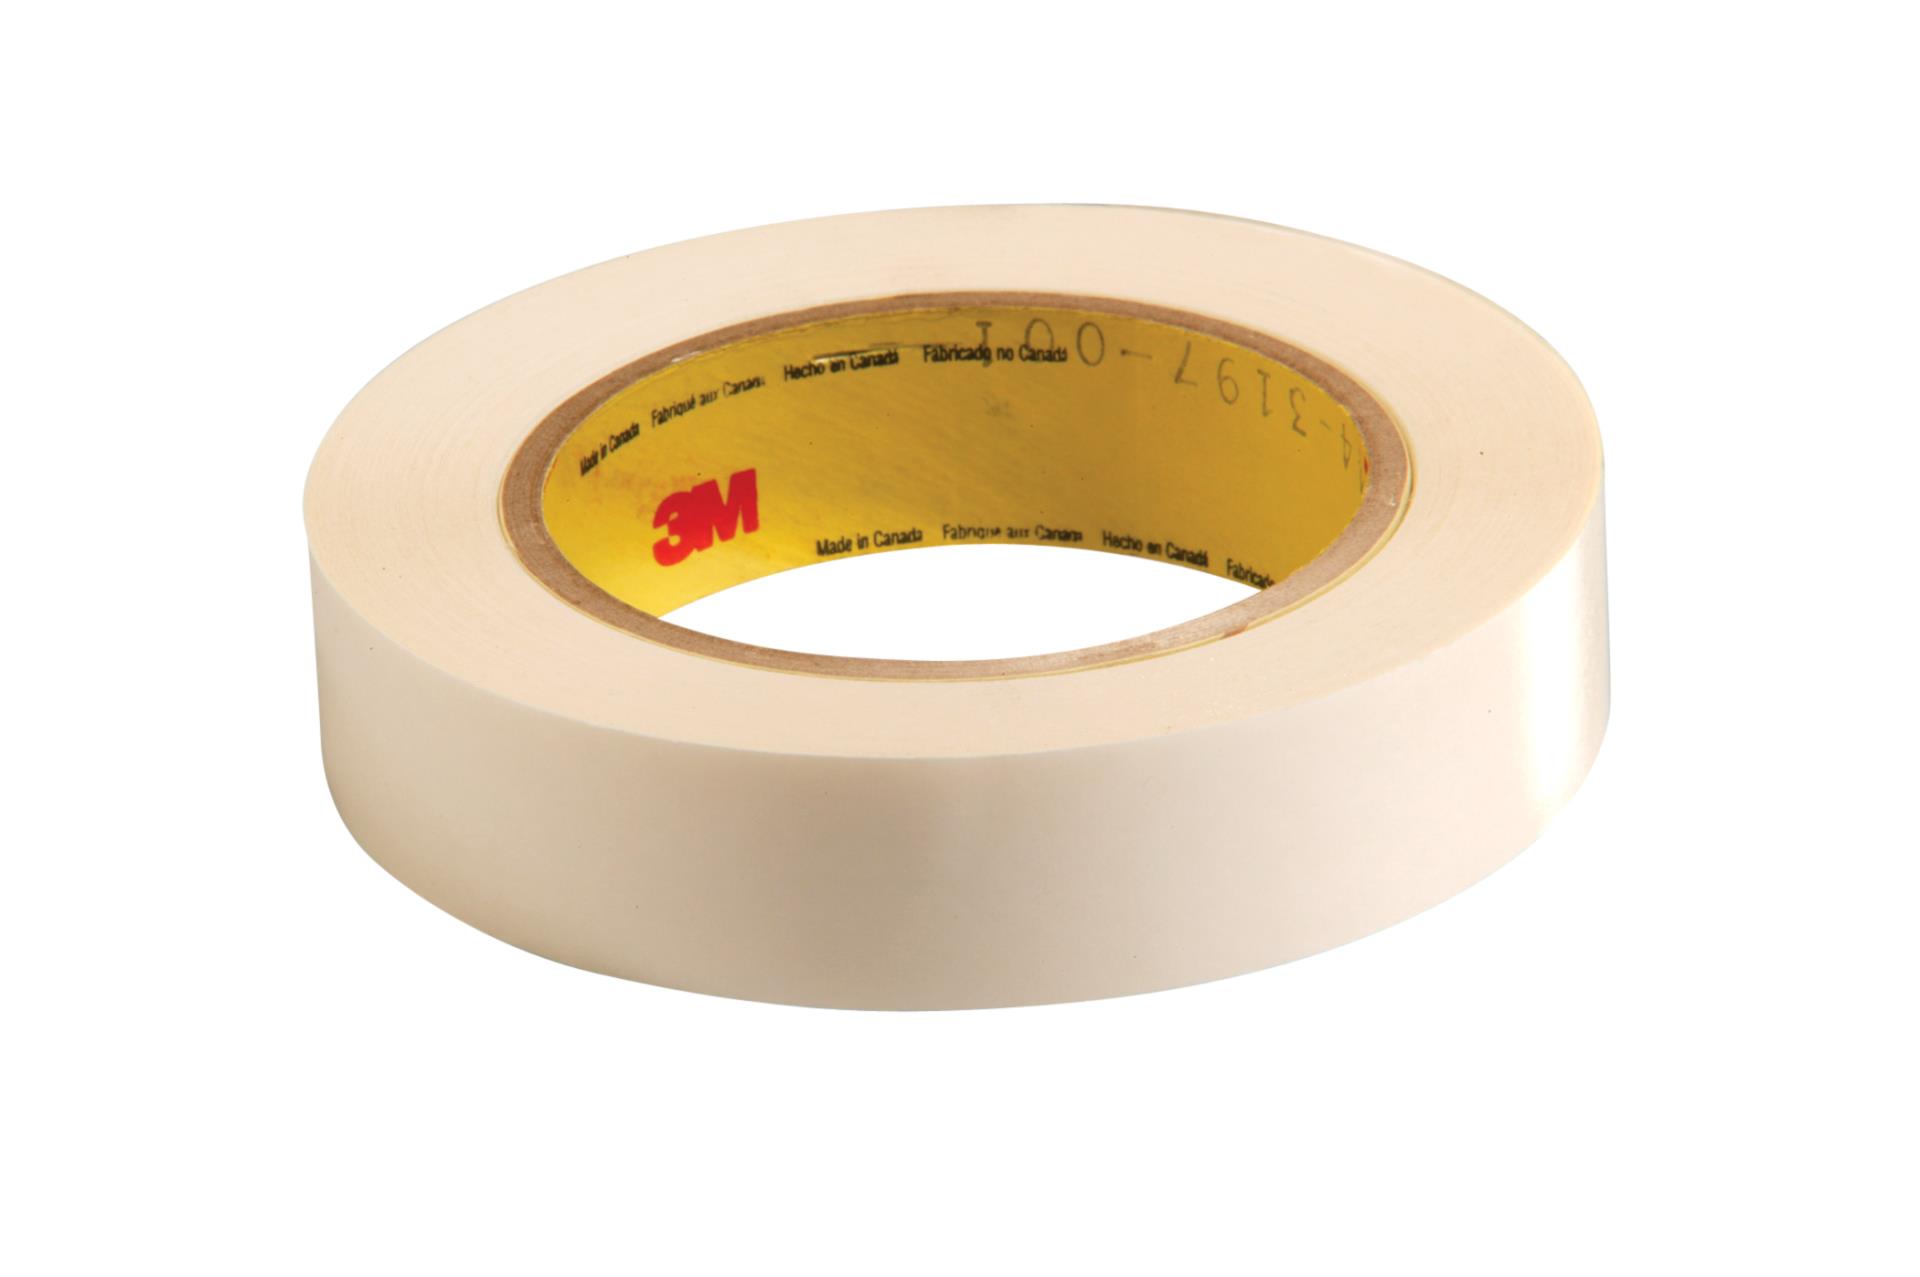  12 of VHB 3M Adhesive Double-Sided Circle Dots 1.38 Inch  Diameter. Mounting bonding Items with Flat Smooth Surface : Industrial &  Scientific